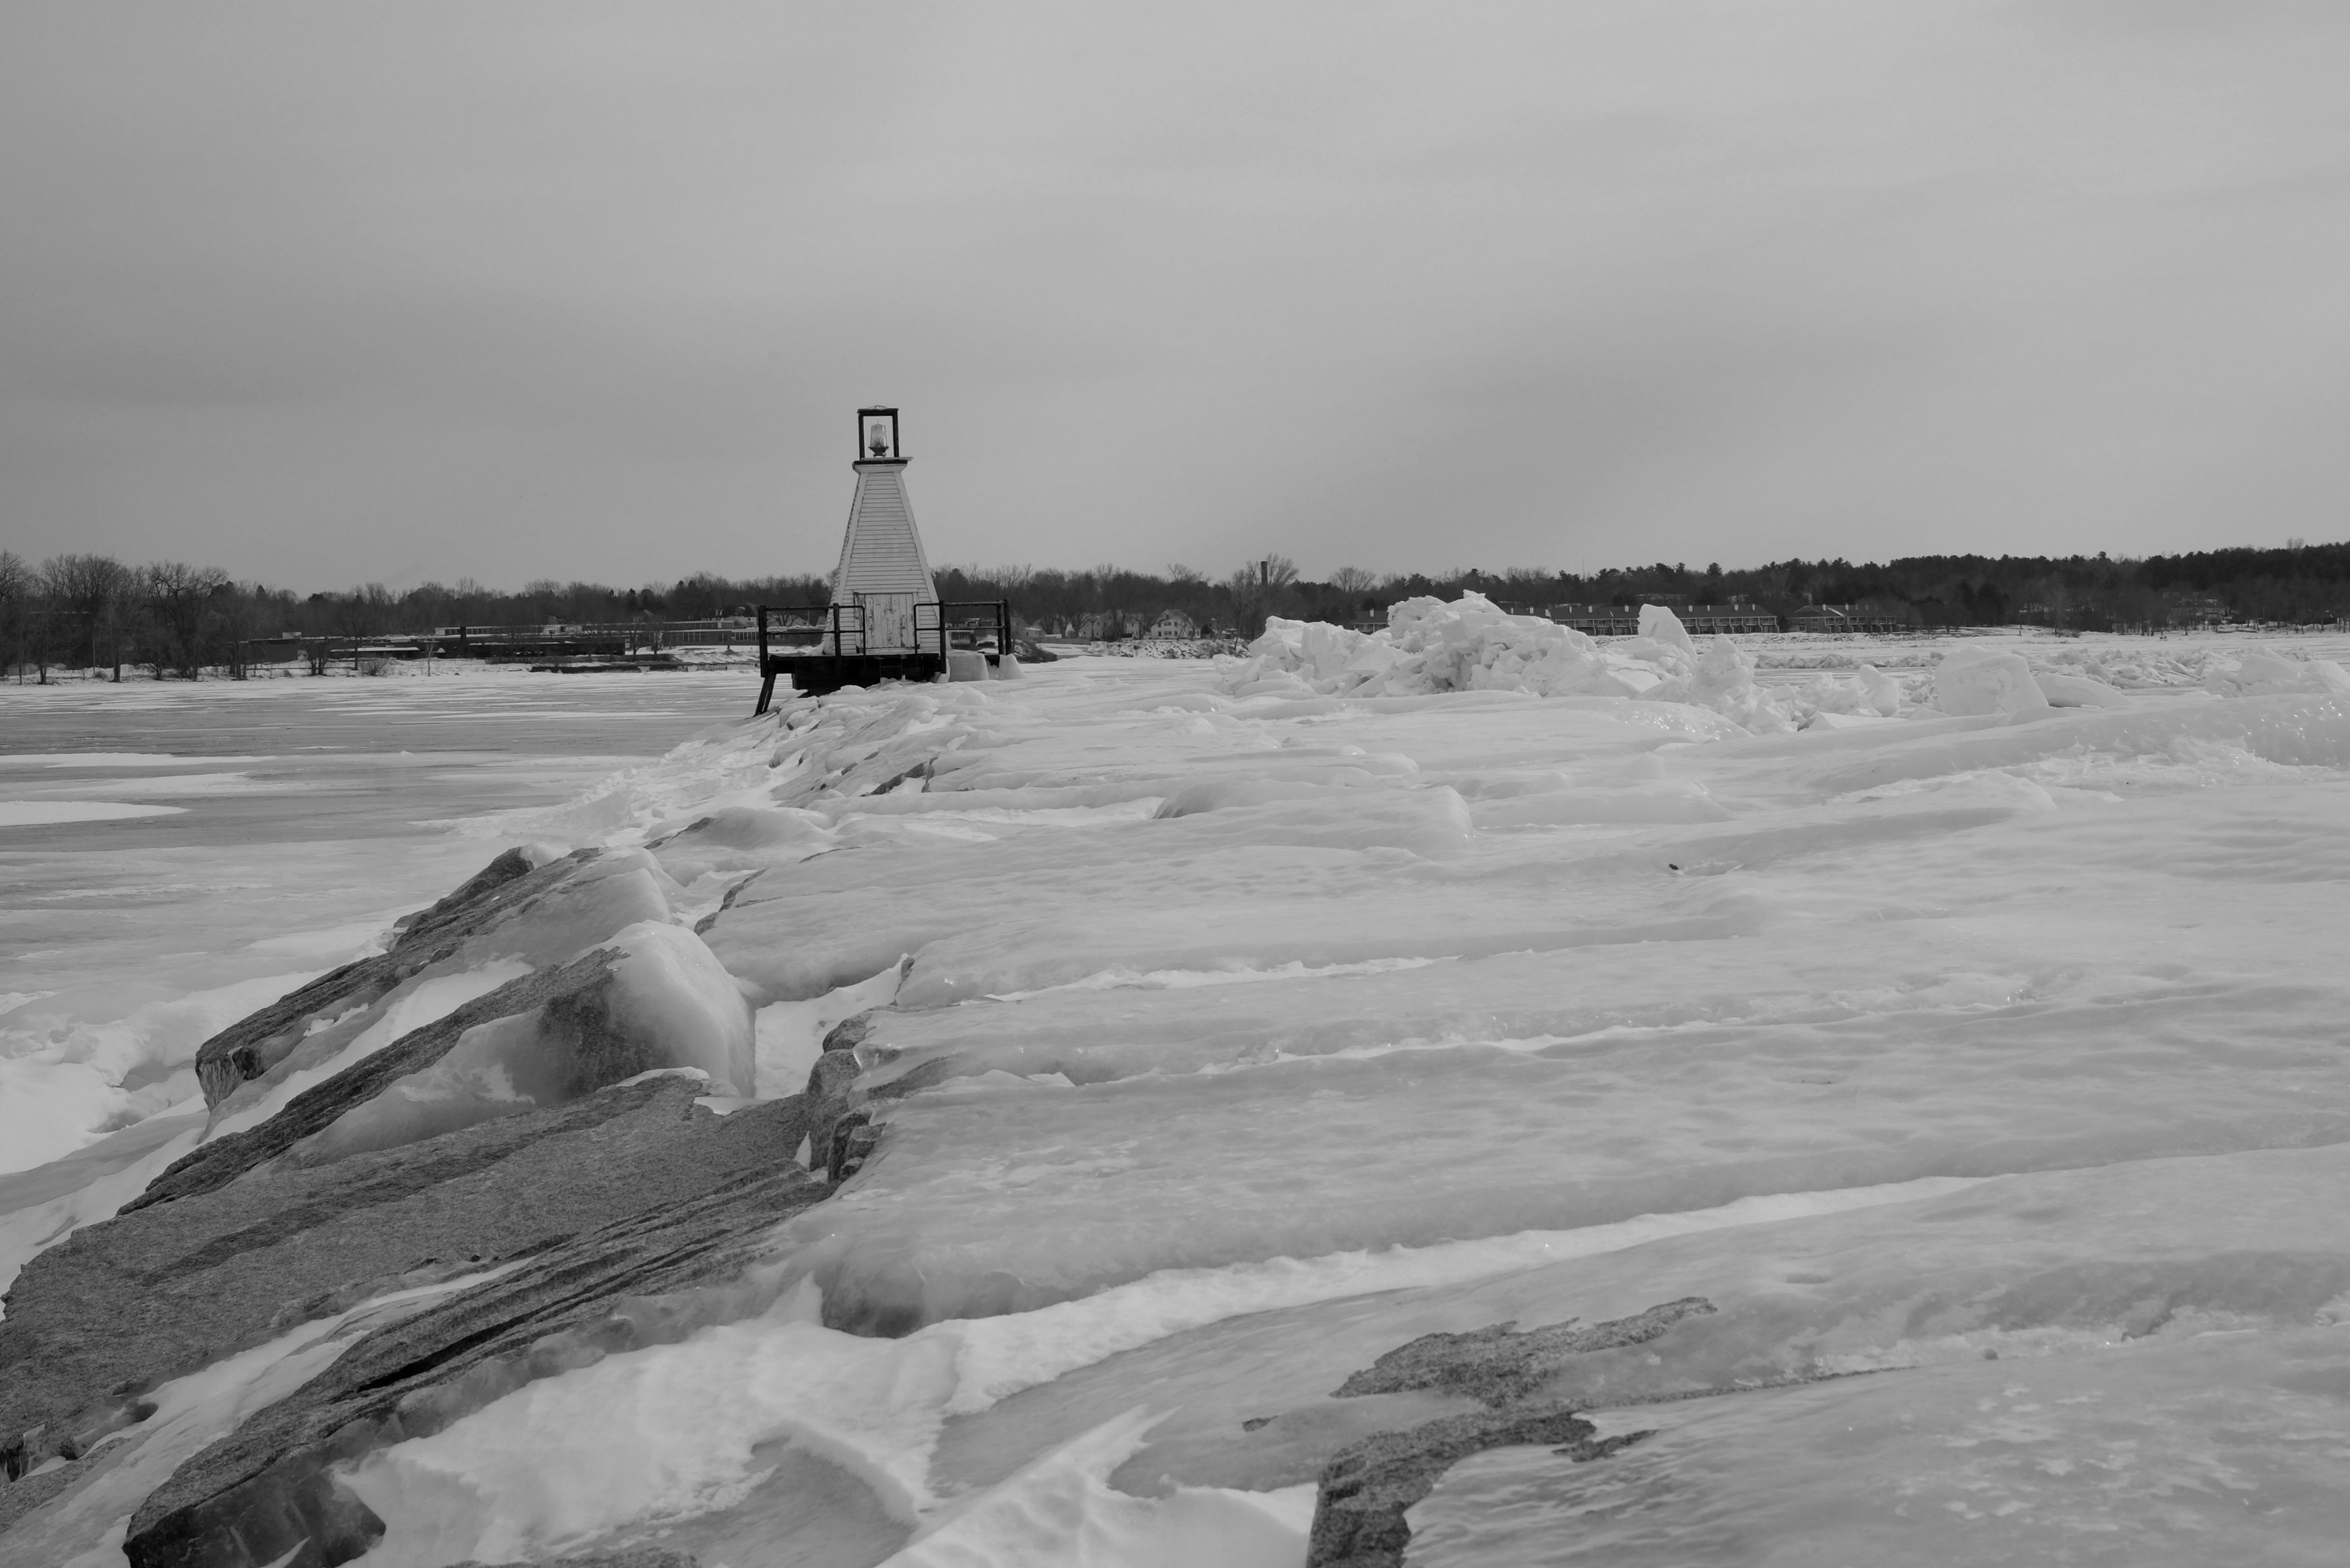 Southern lighthouse on the Burlington breakwater, March 7, 2015. The ...